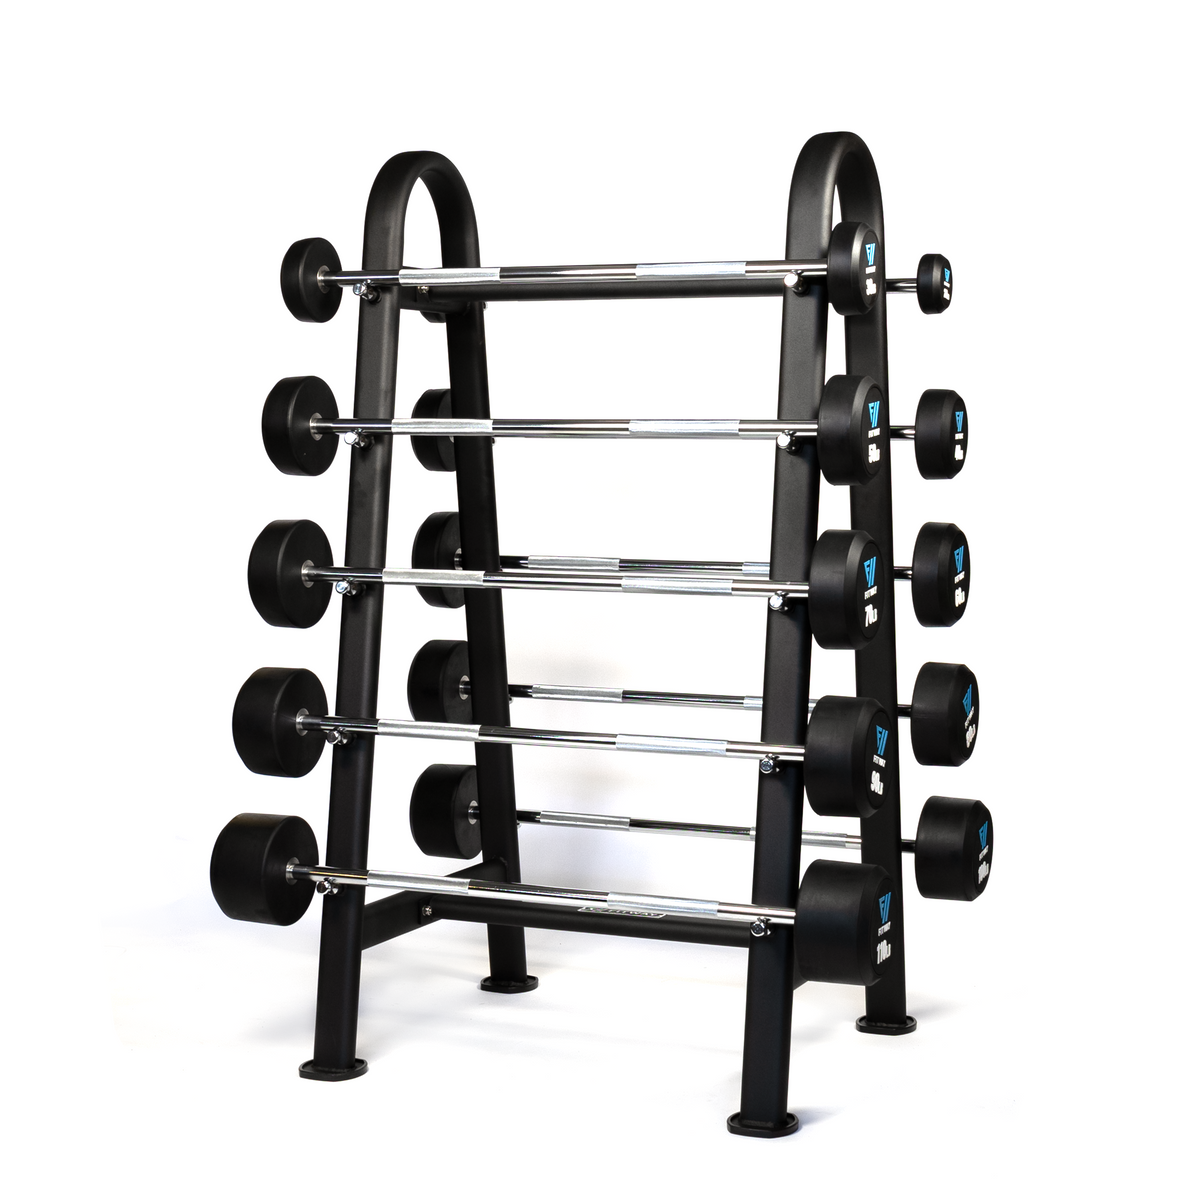 FitWay Equip. Straight Barbell Set 20-110lb 